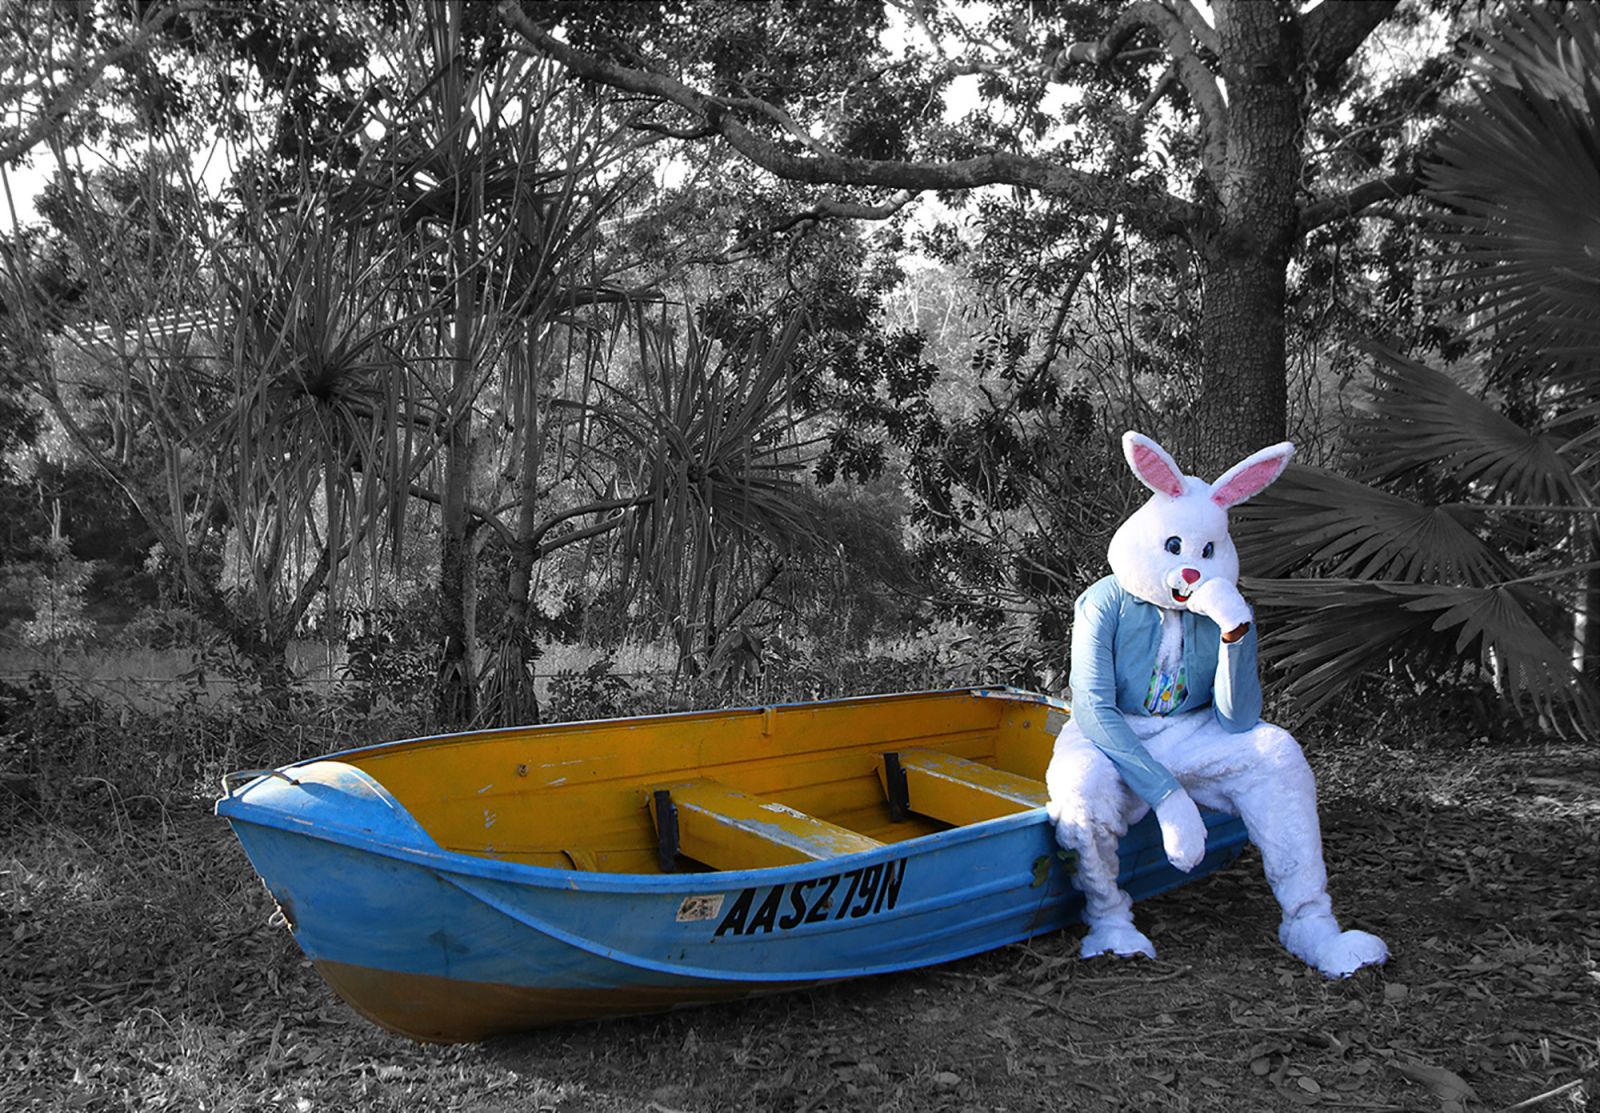 Life-sized Easter bunny sitting on a boat in the bush.